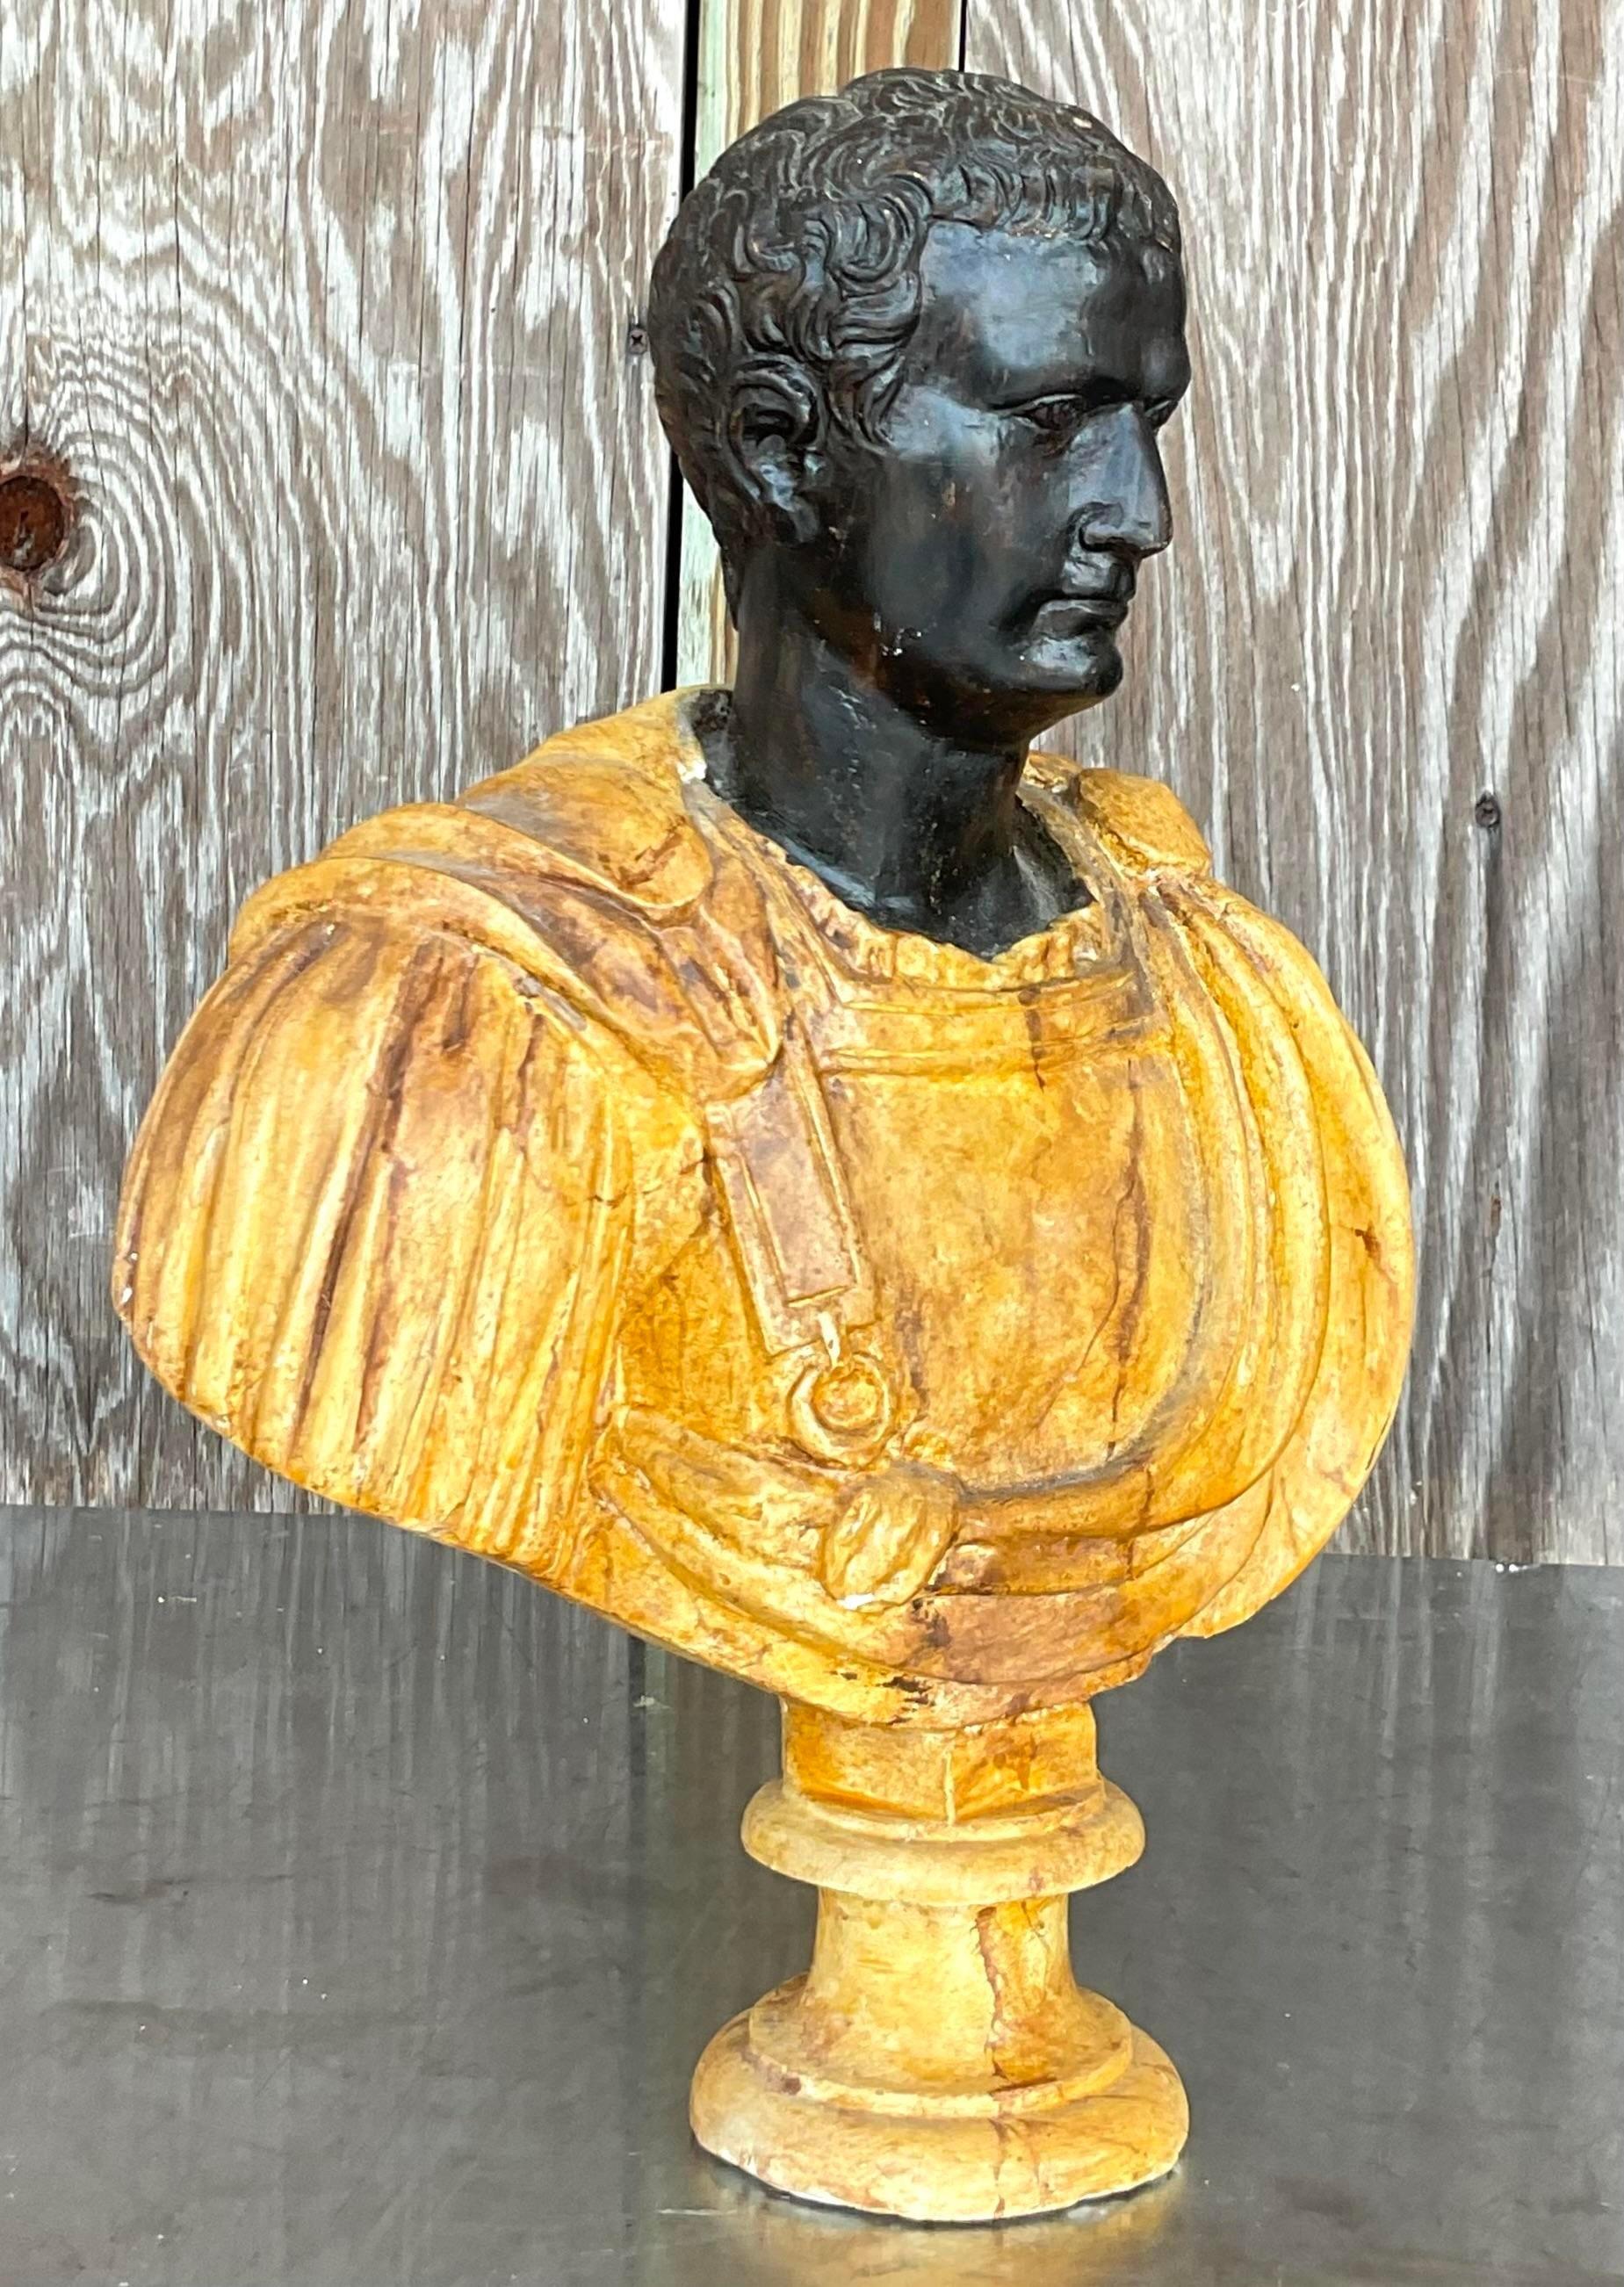 A striking vintage neoclassical plaster bust of man. A chic Grand Tour figure with a gorgeous hand painted finish. Acquired from the estate of Massimo Camilo, the designer for Gianni Versace. Two other busts from the same series also available on my